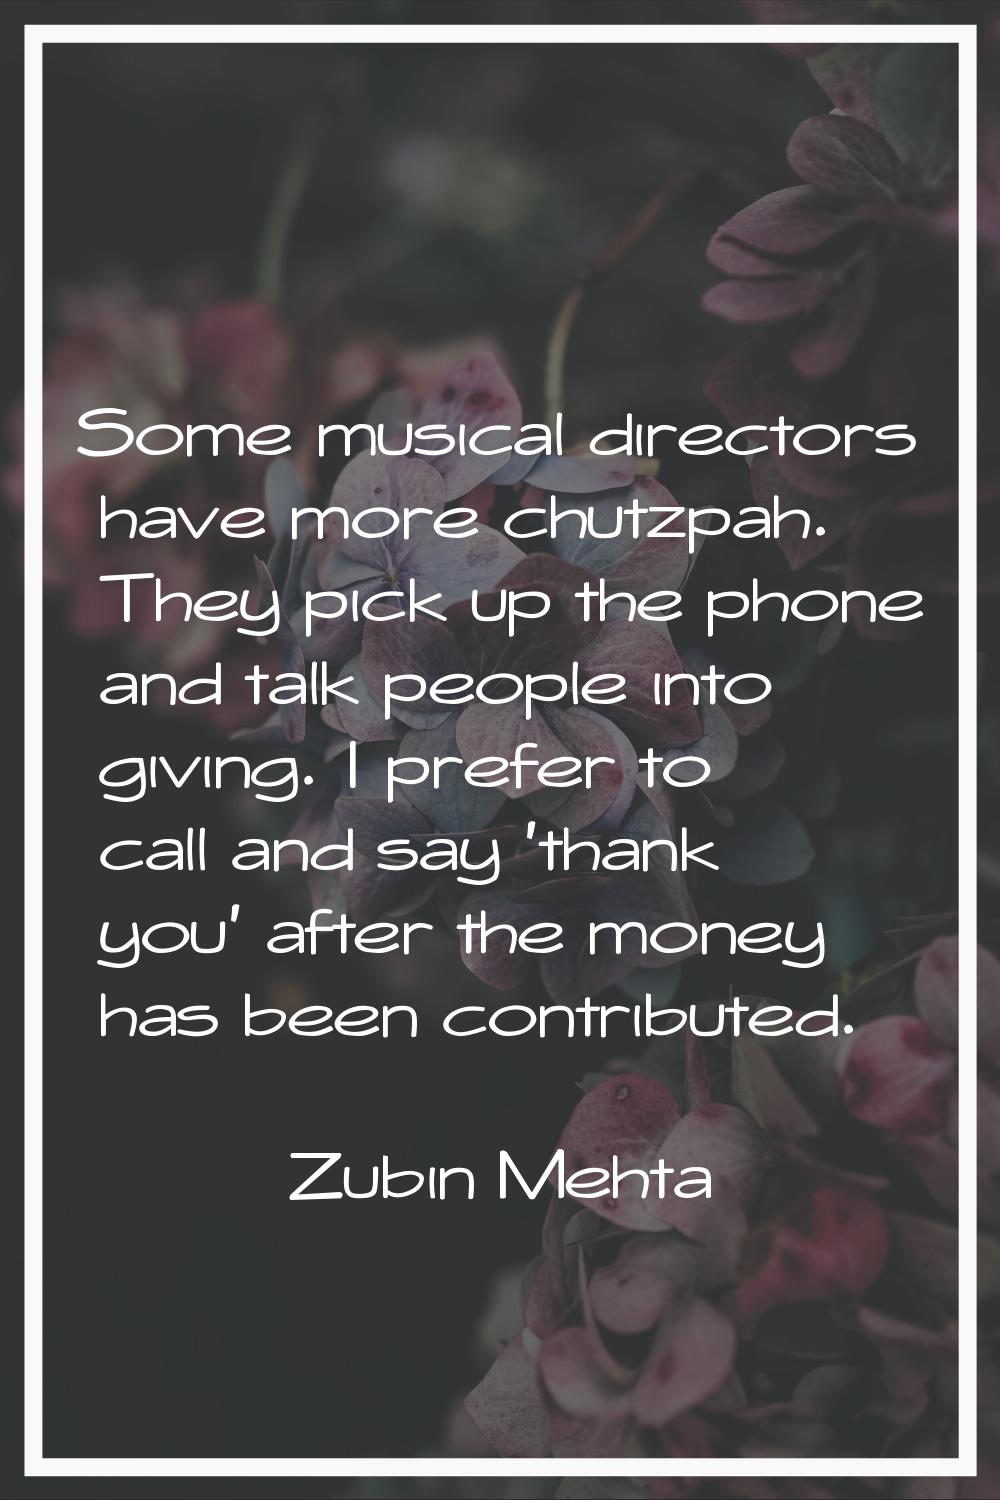 Some musical directors have more chutzpah. They pick up the phone and talk people into giving. I pr